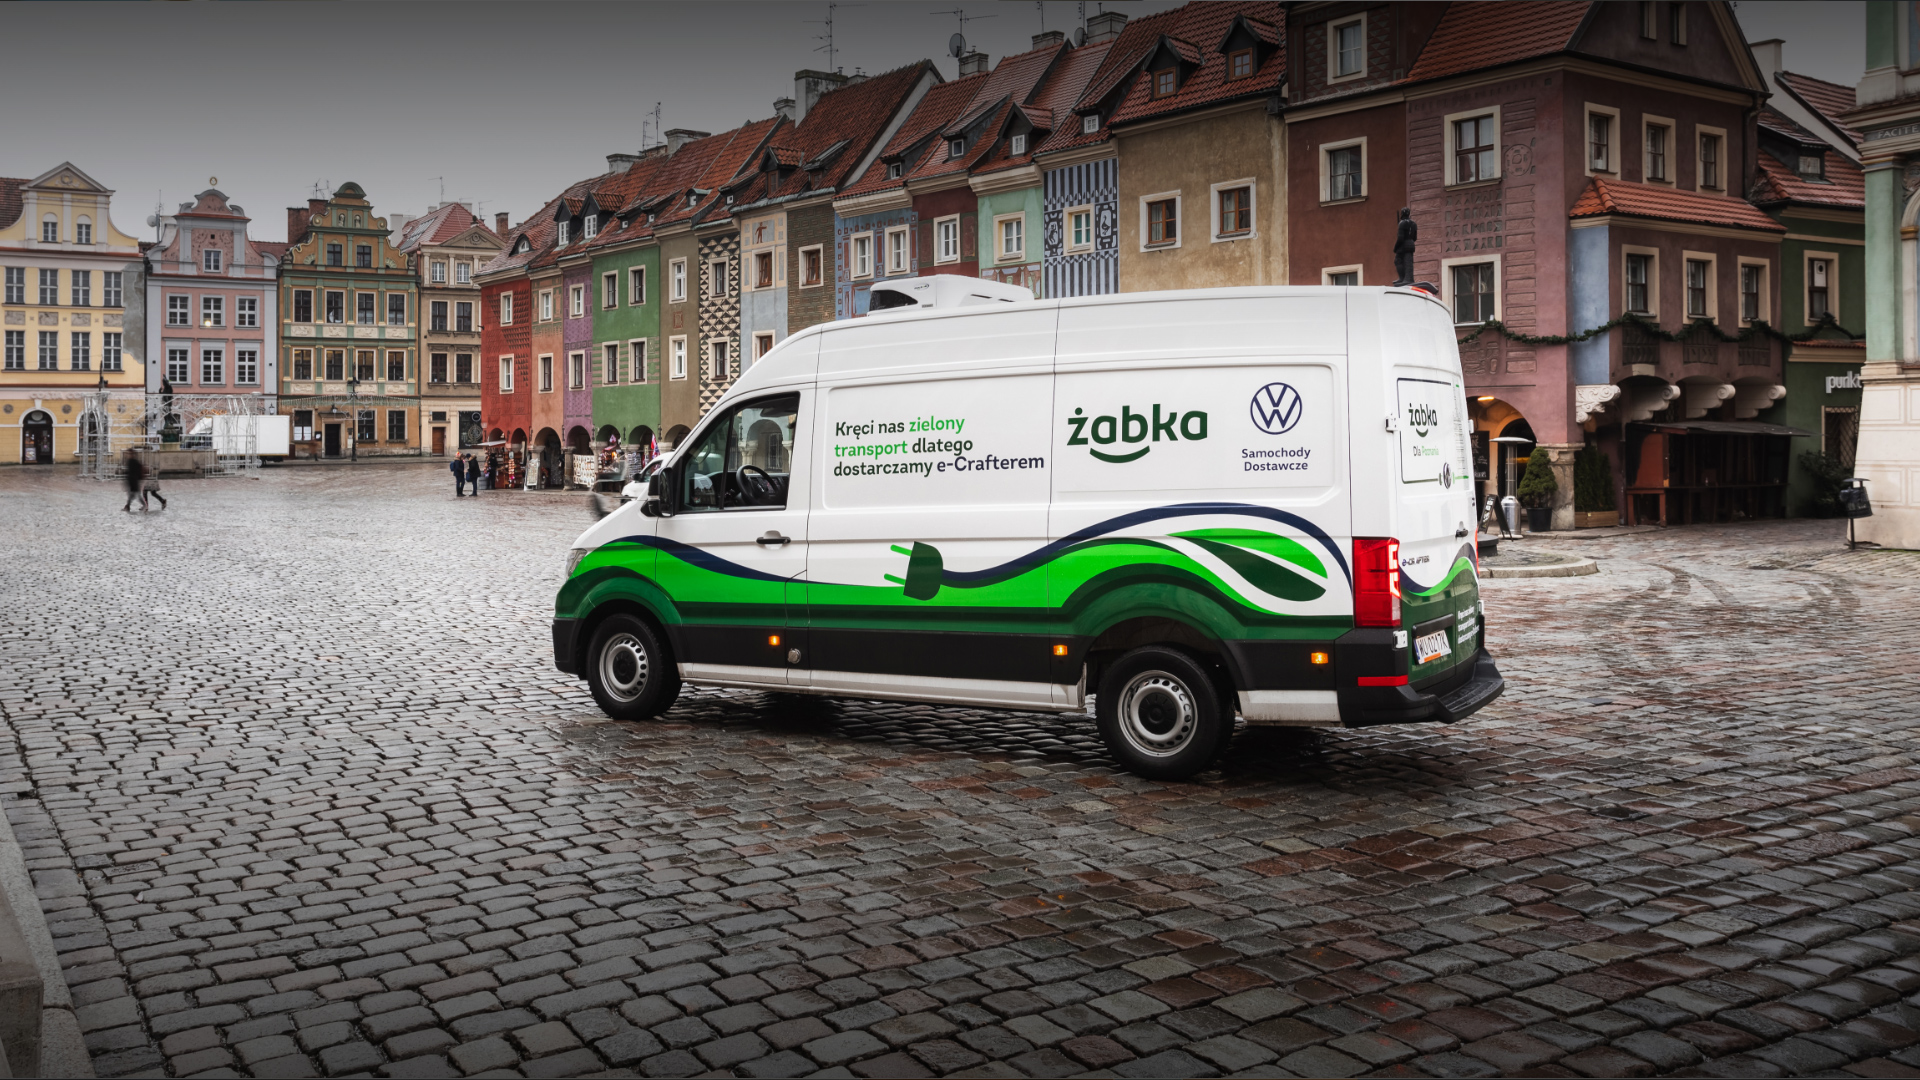 zabka group's electric cars, in order to reduce the carbon print and support the idea of green planet